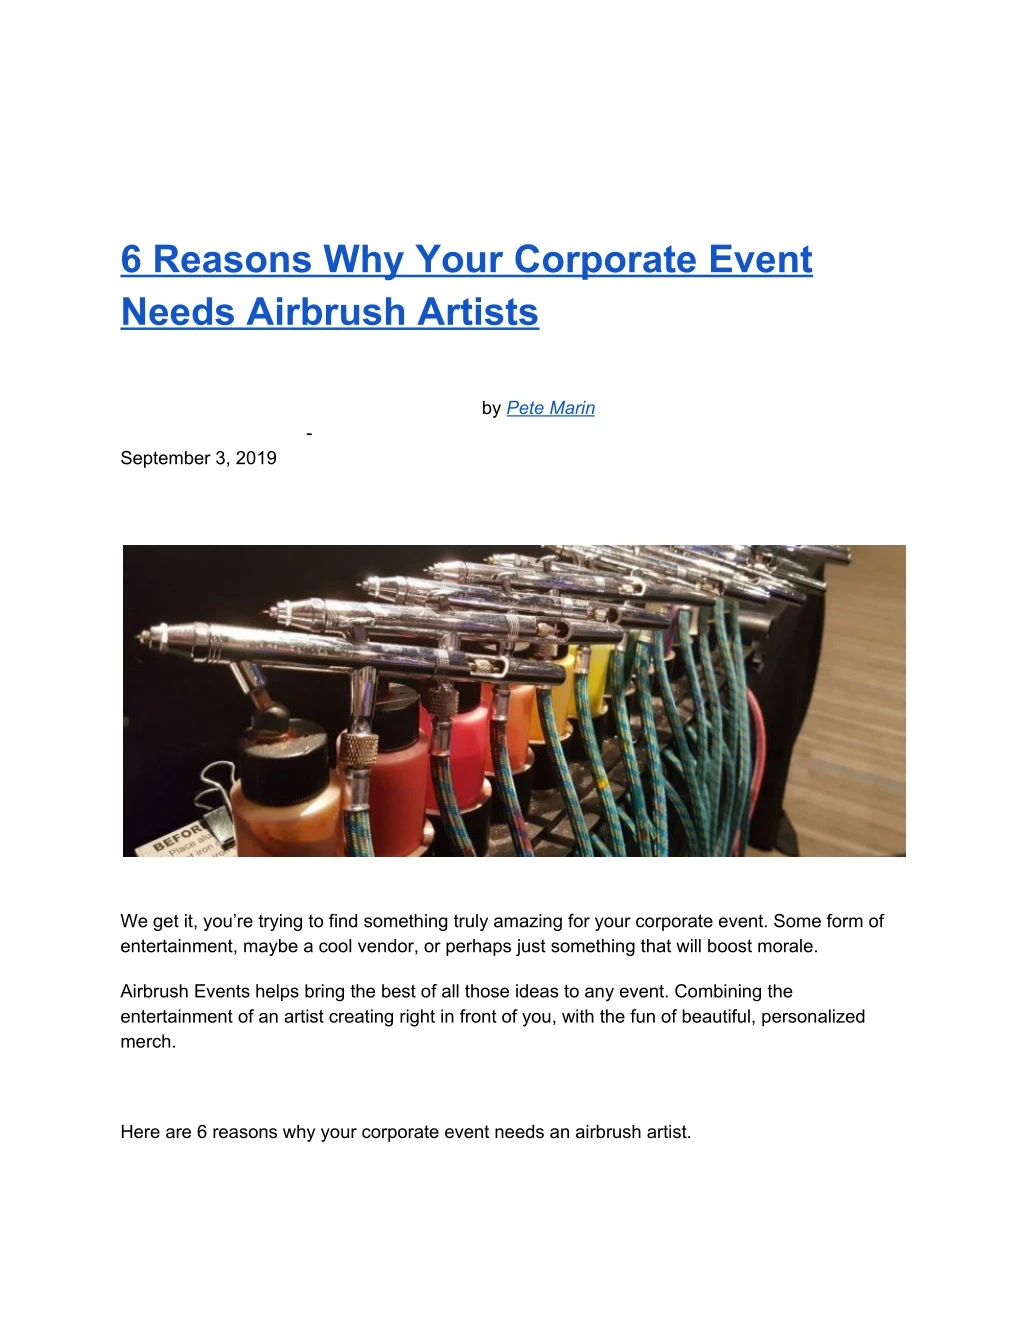 6 reasons why your corporate event needs airbrush